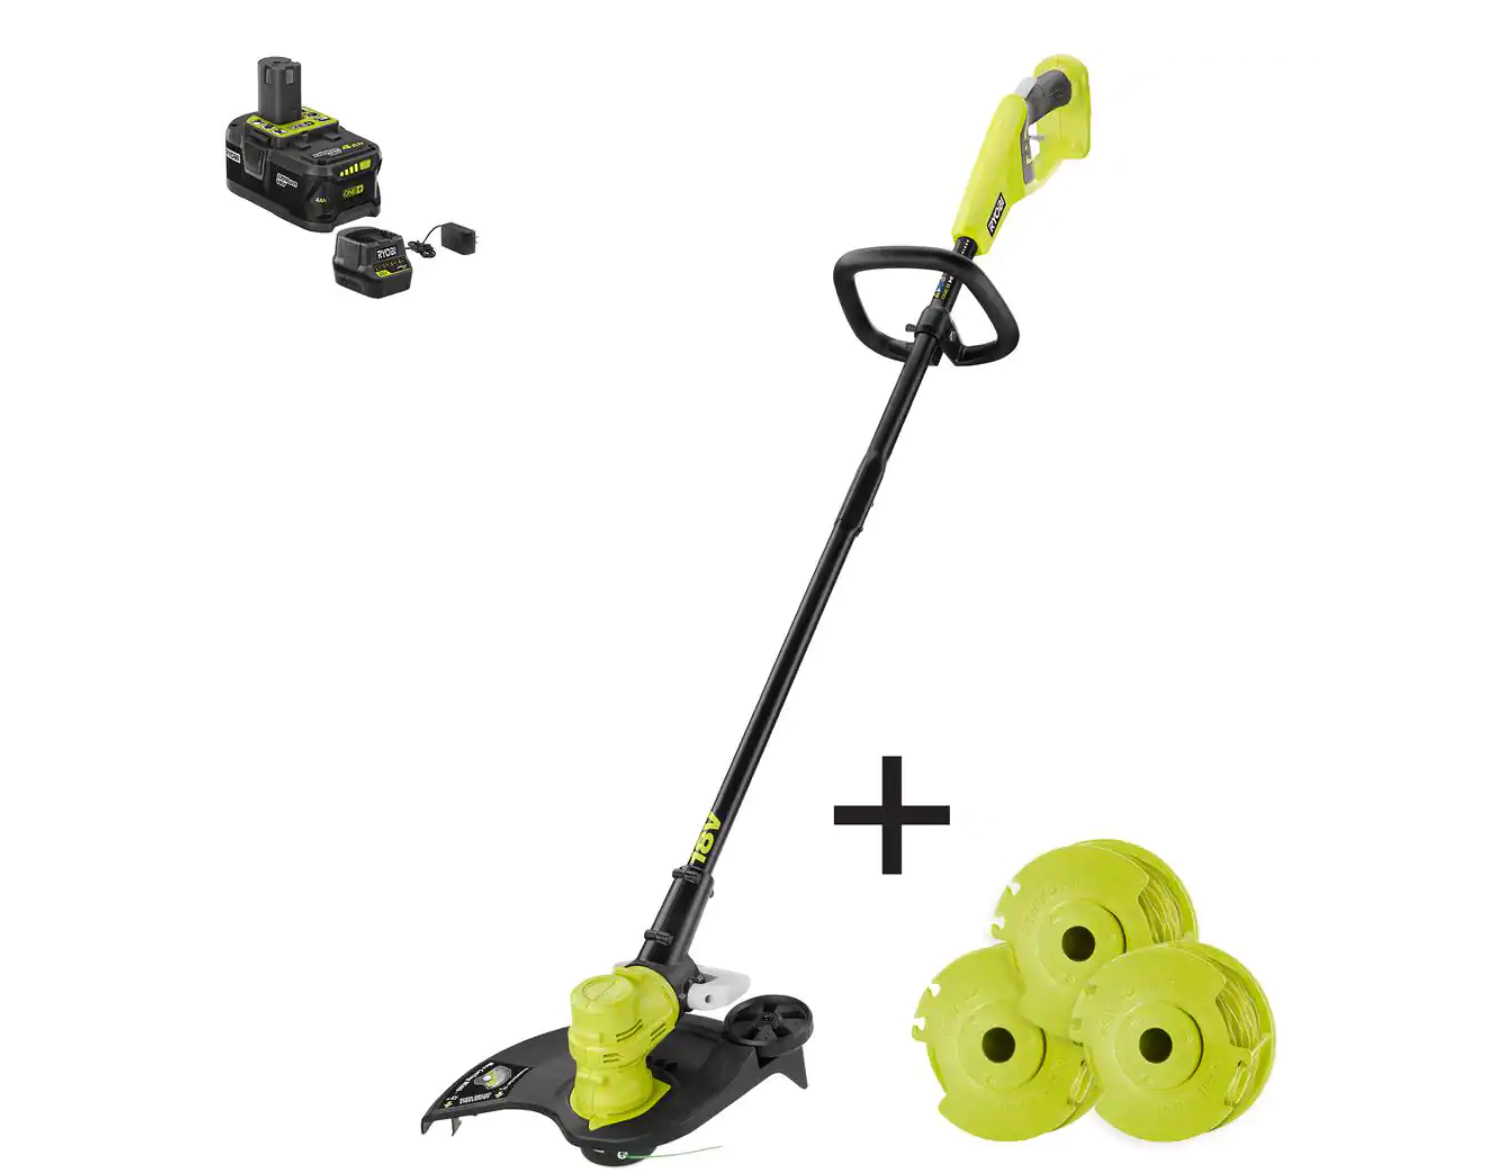 https://bigbigmart.com/wp-content/uploads/2022/07/RYOBI-P20140-AC-ONE-18V-13-in.-Cordless-Battery-String-Trimmer-Edger-with-Extra-3-Pack-of-Spools-4.0-Ah-Battery-and-Charger.png